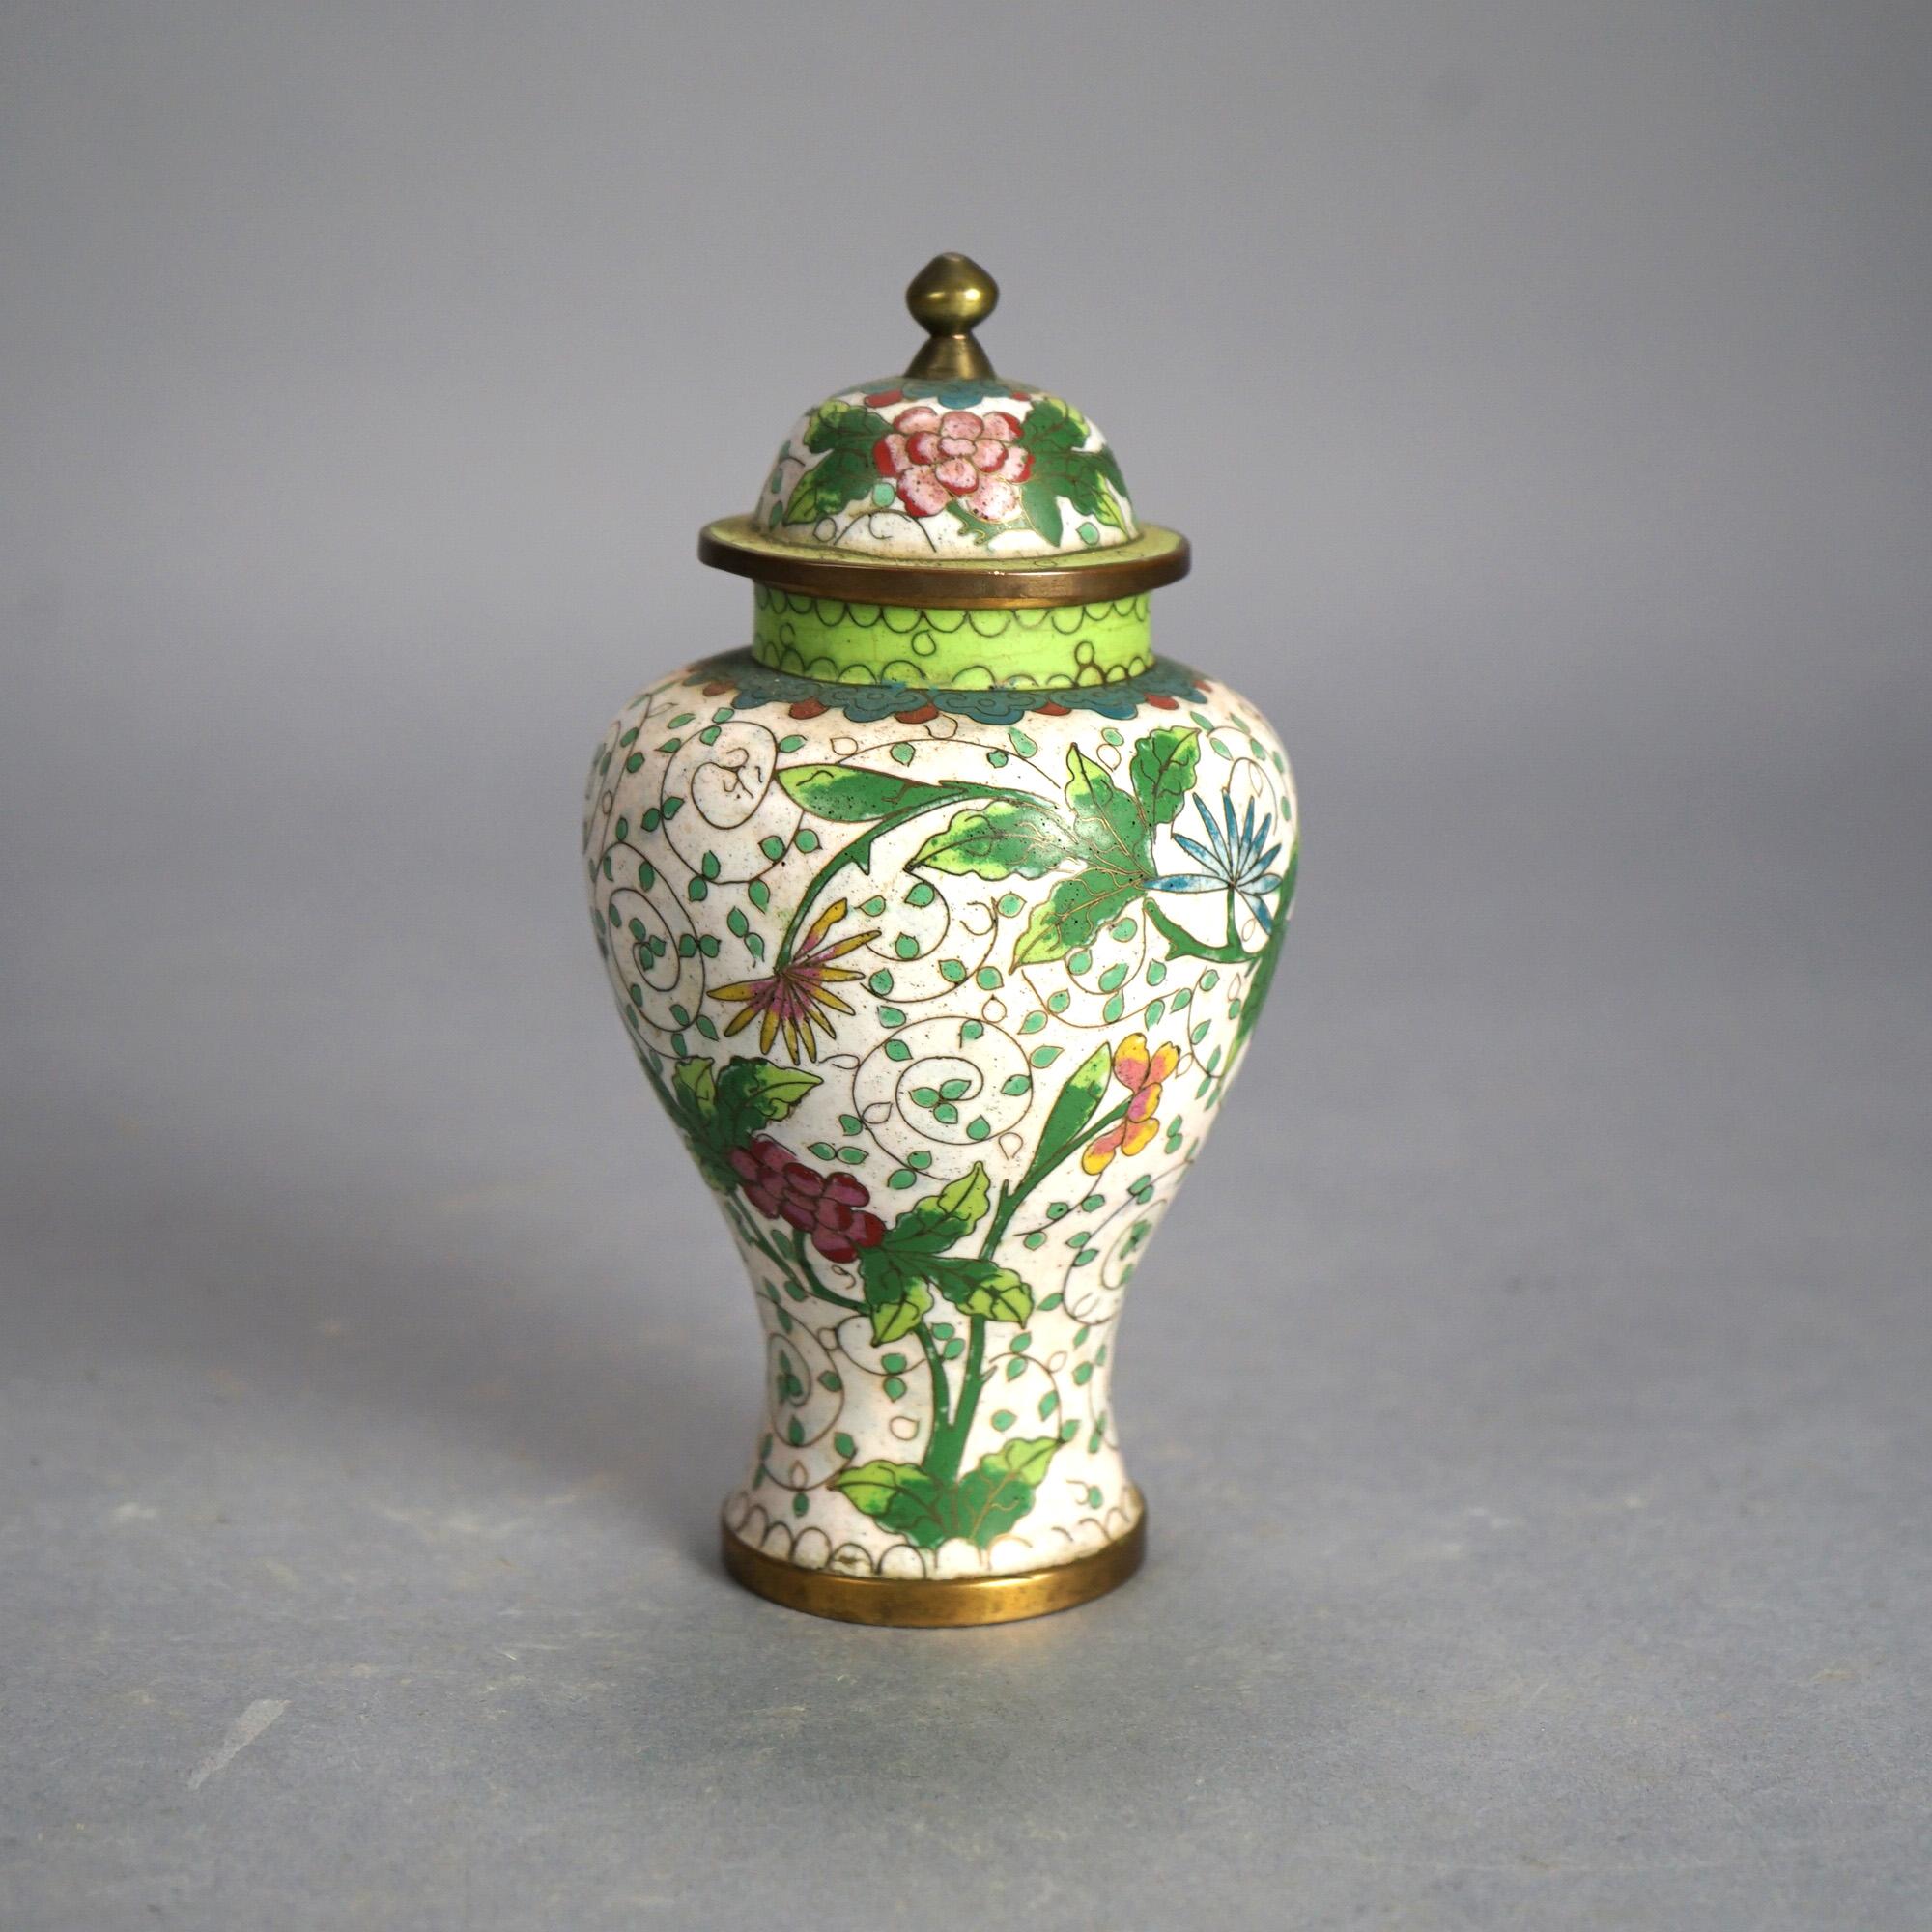 Antique Chinese Bronze Cloisonne Enameled Lidded Urn with Flowers C1920 For Sale 1